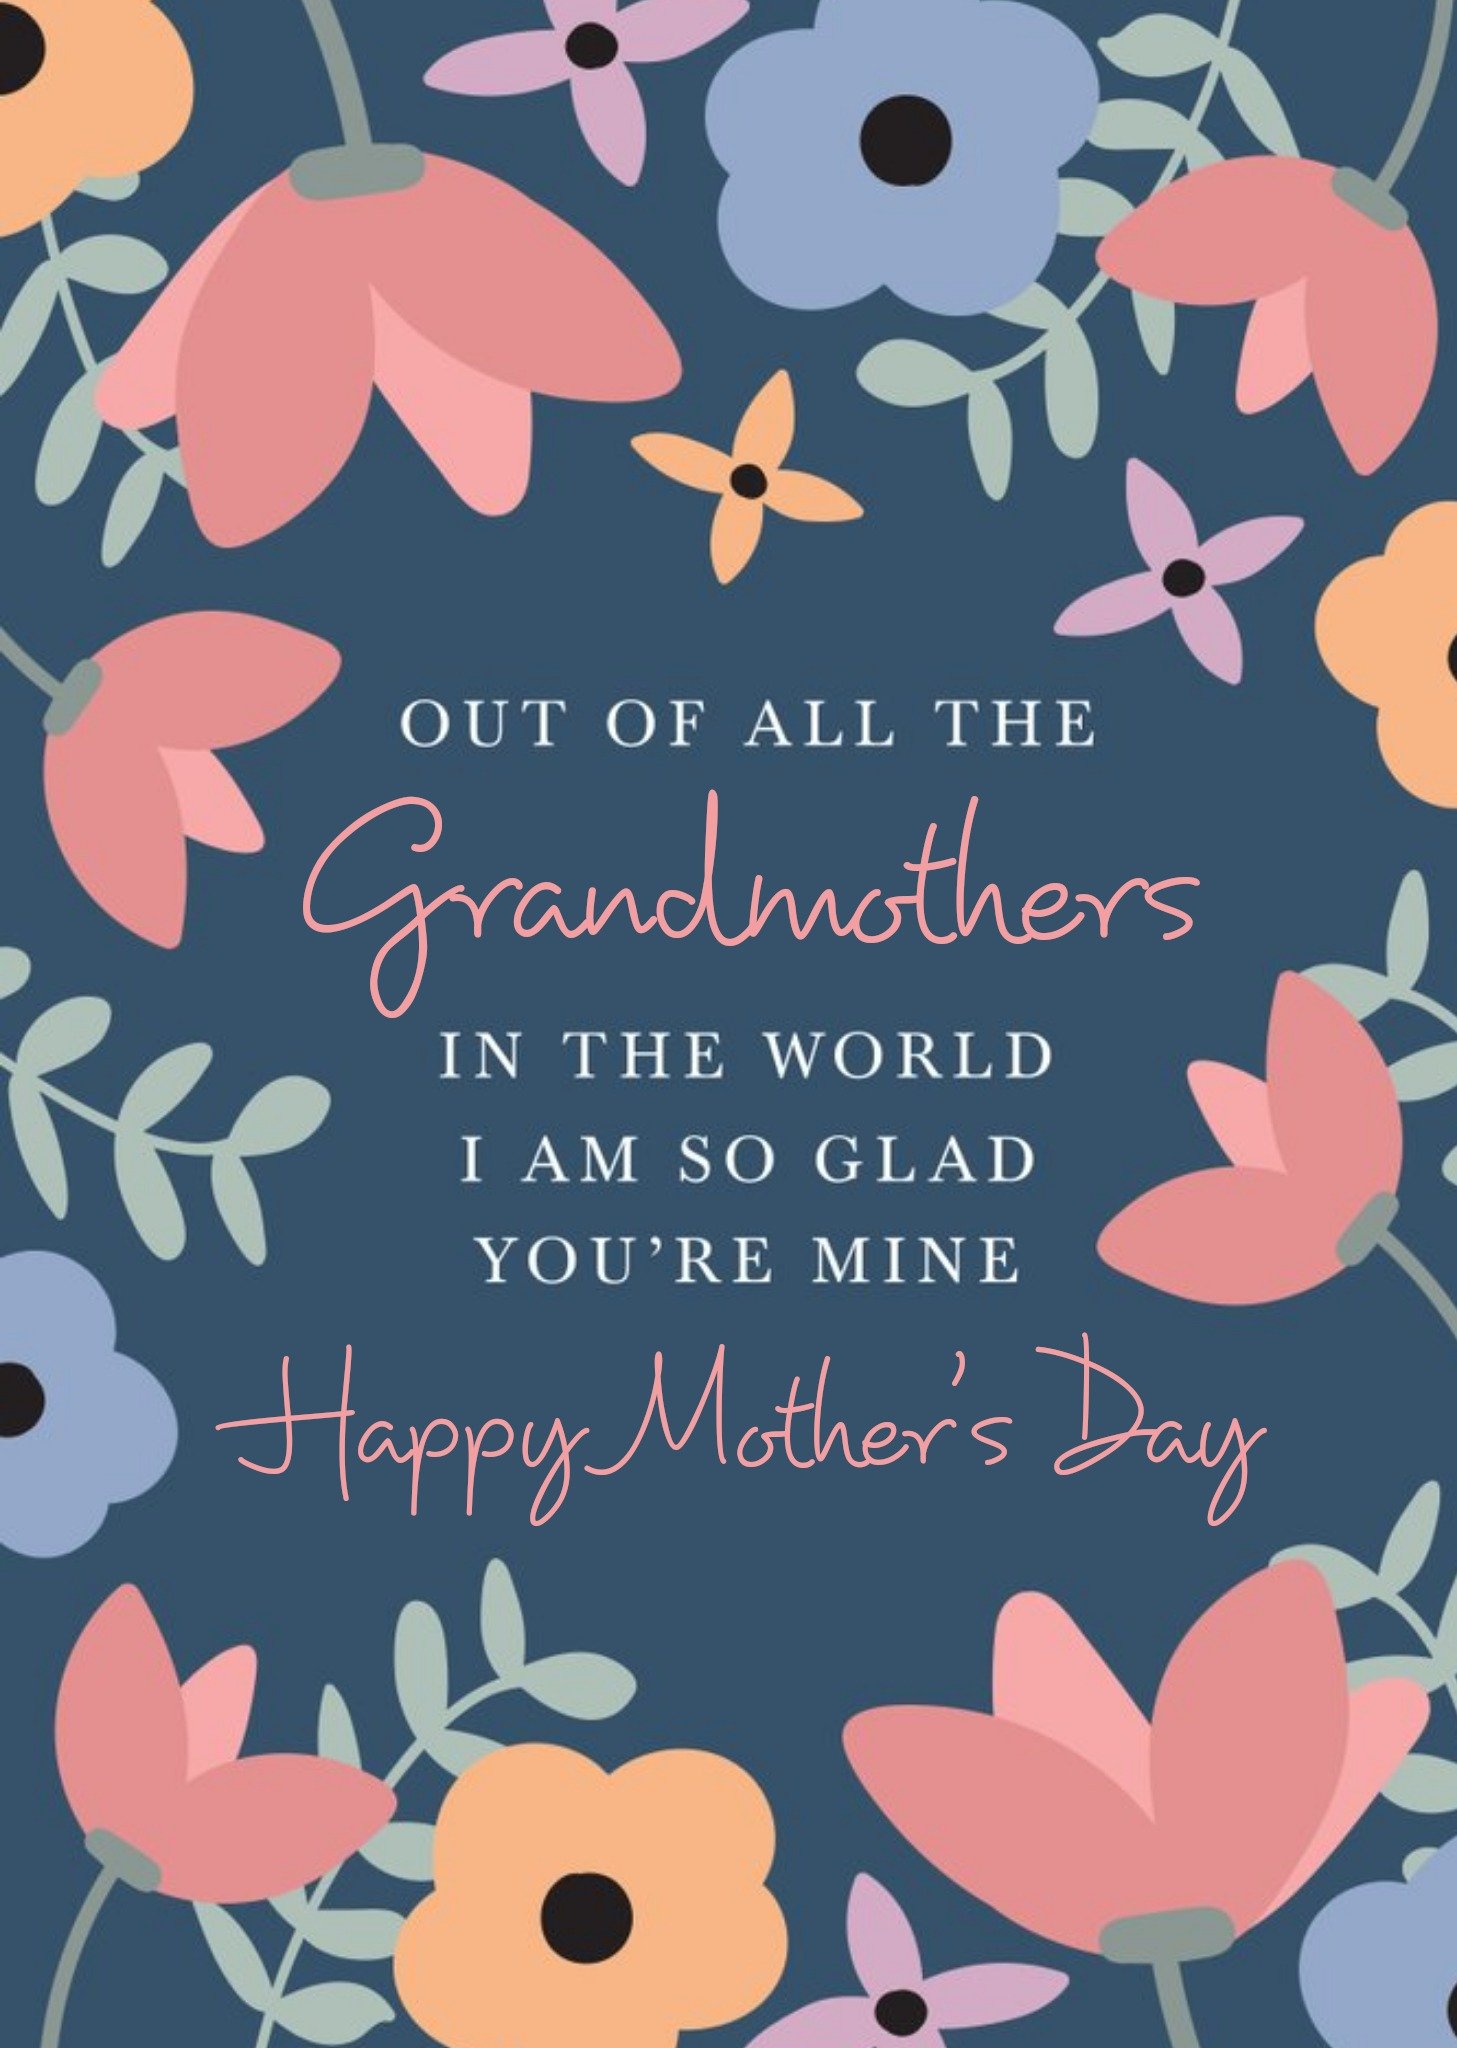 Moonpig Muted Floral Sentimental Verse Grandmother Mother's Day Card Ecard